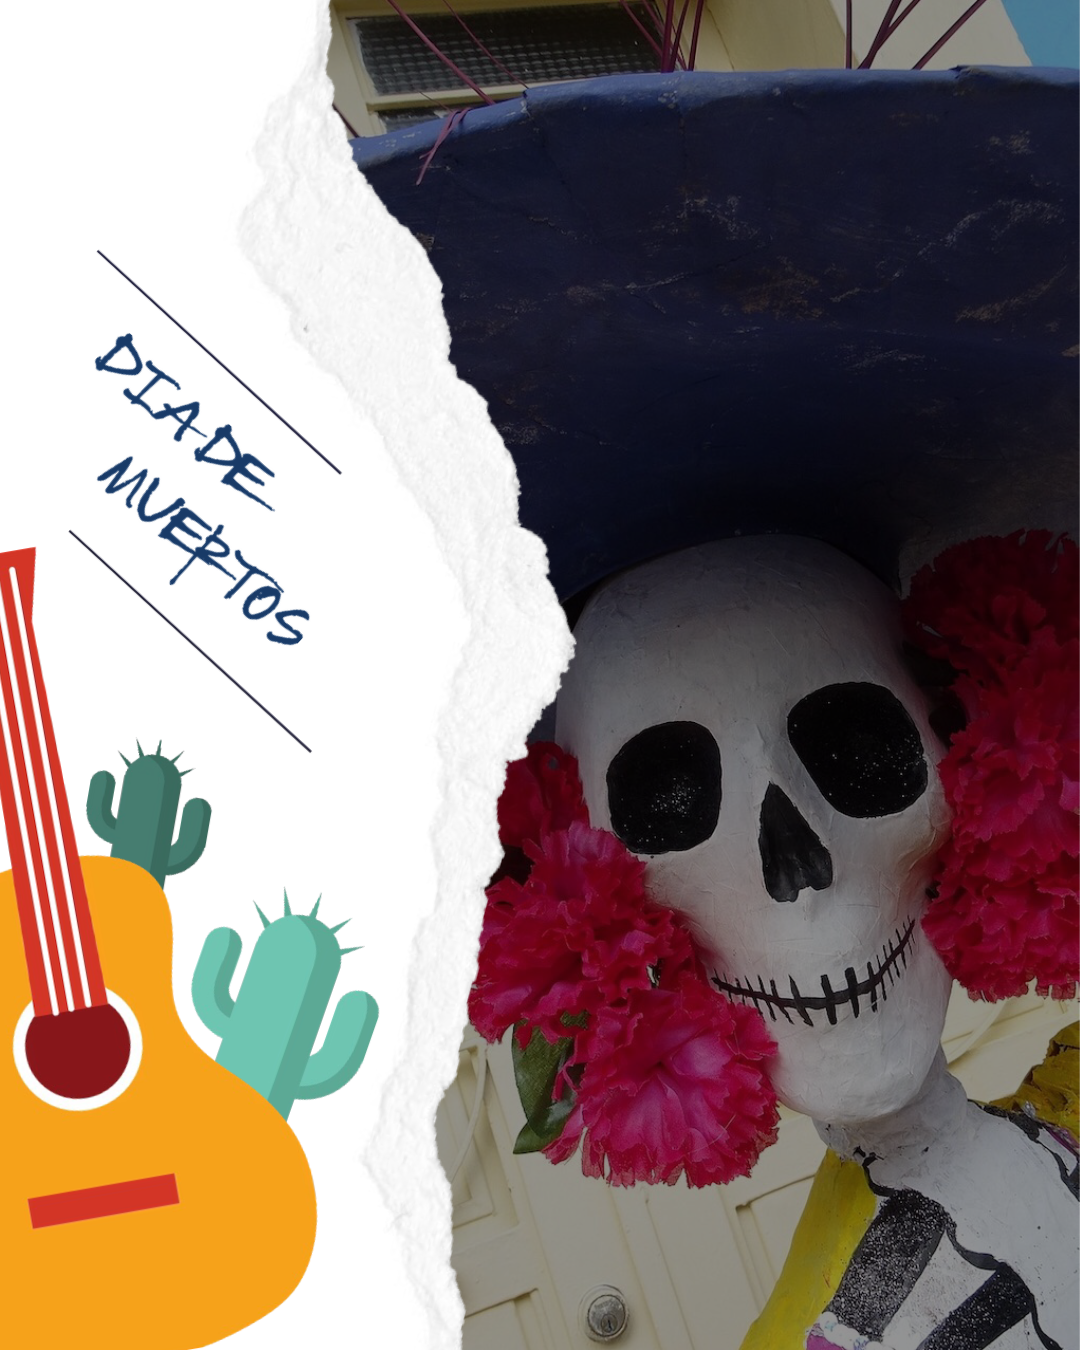 A Skull With Flowers In Its Mouth And A Guitar Day Of The Dead Template